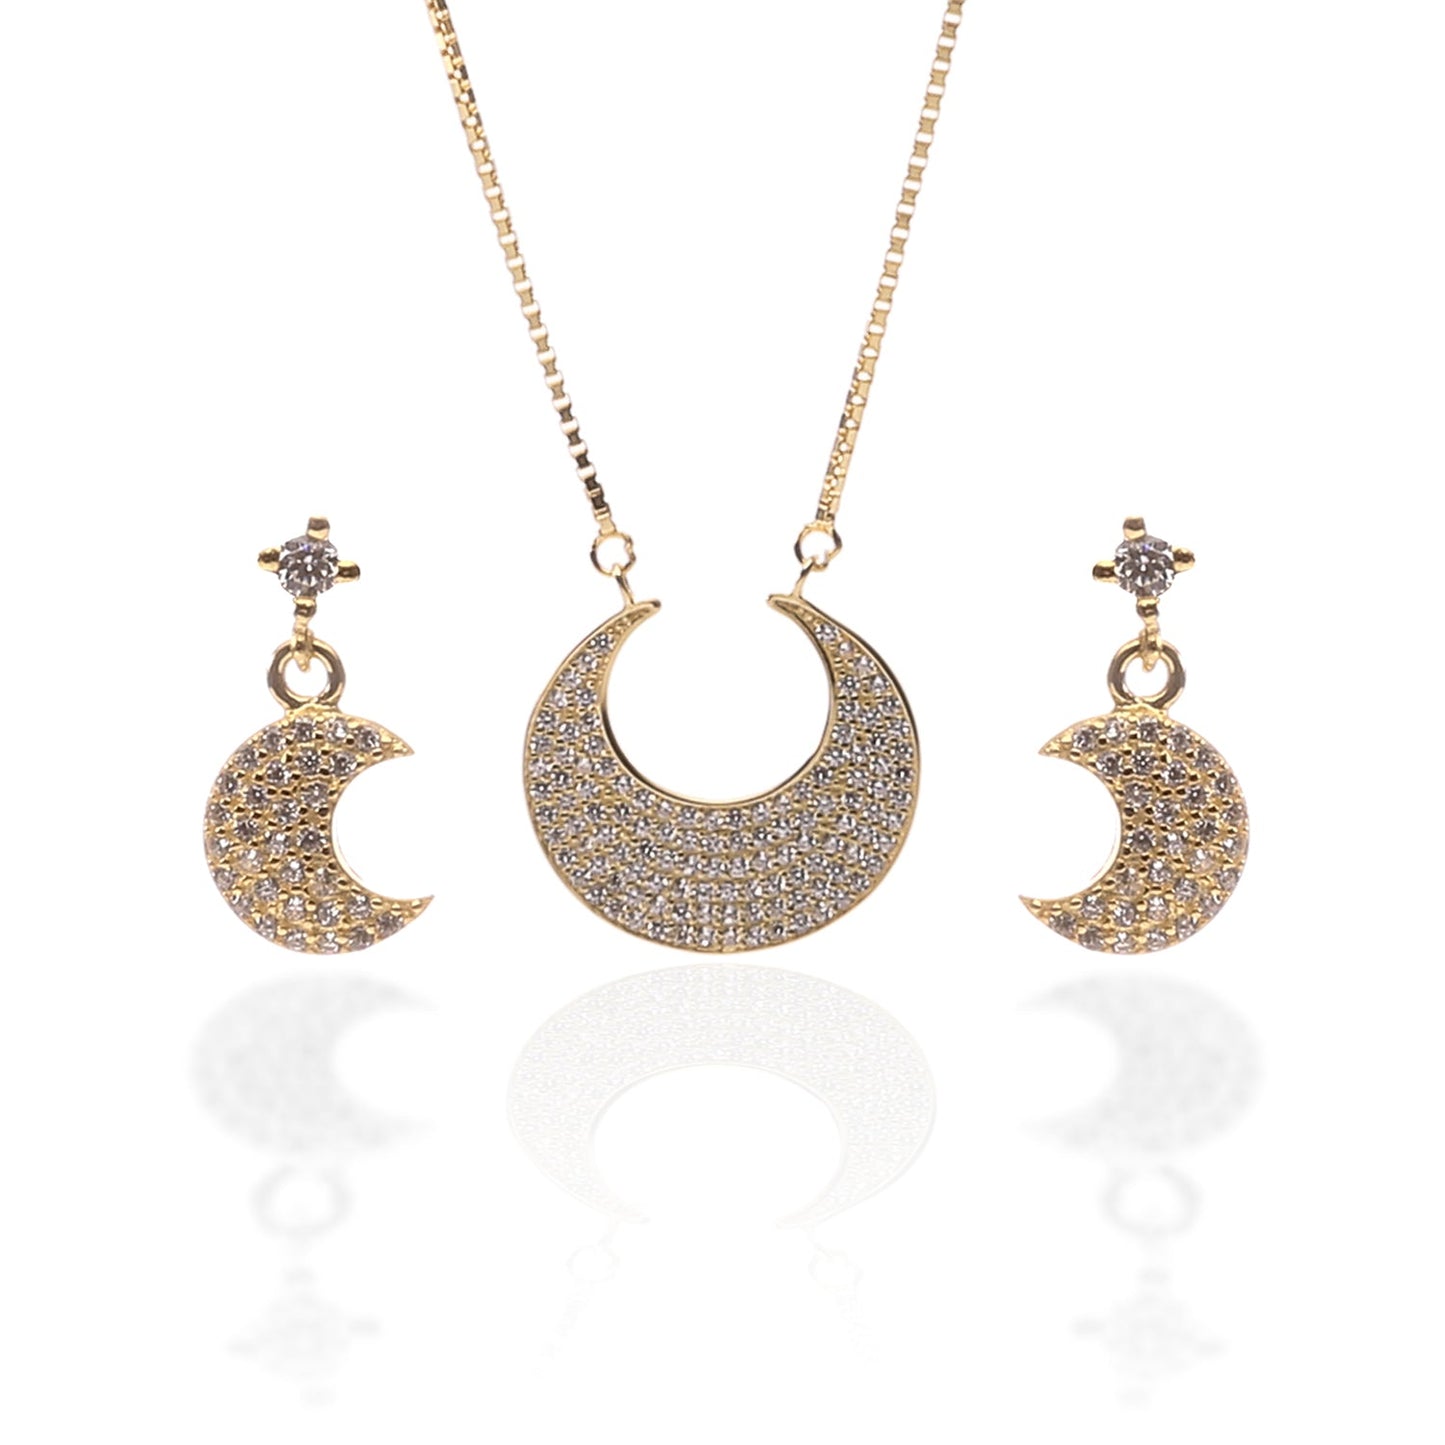 Crescent Moon Shaped Pendant Necklace and Earrings Set - ARJW1001GD ARCADIO